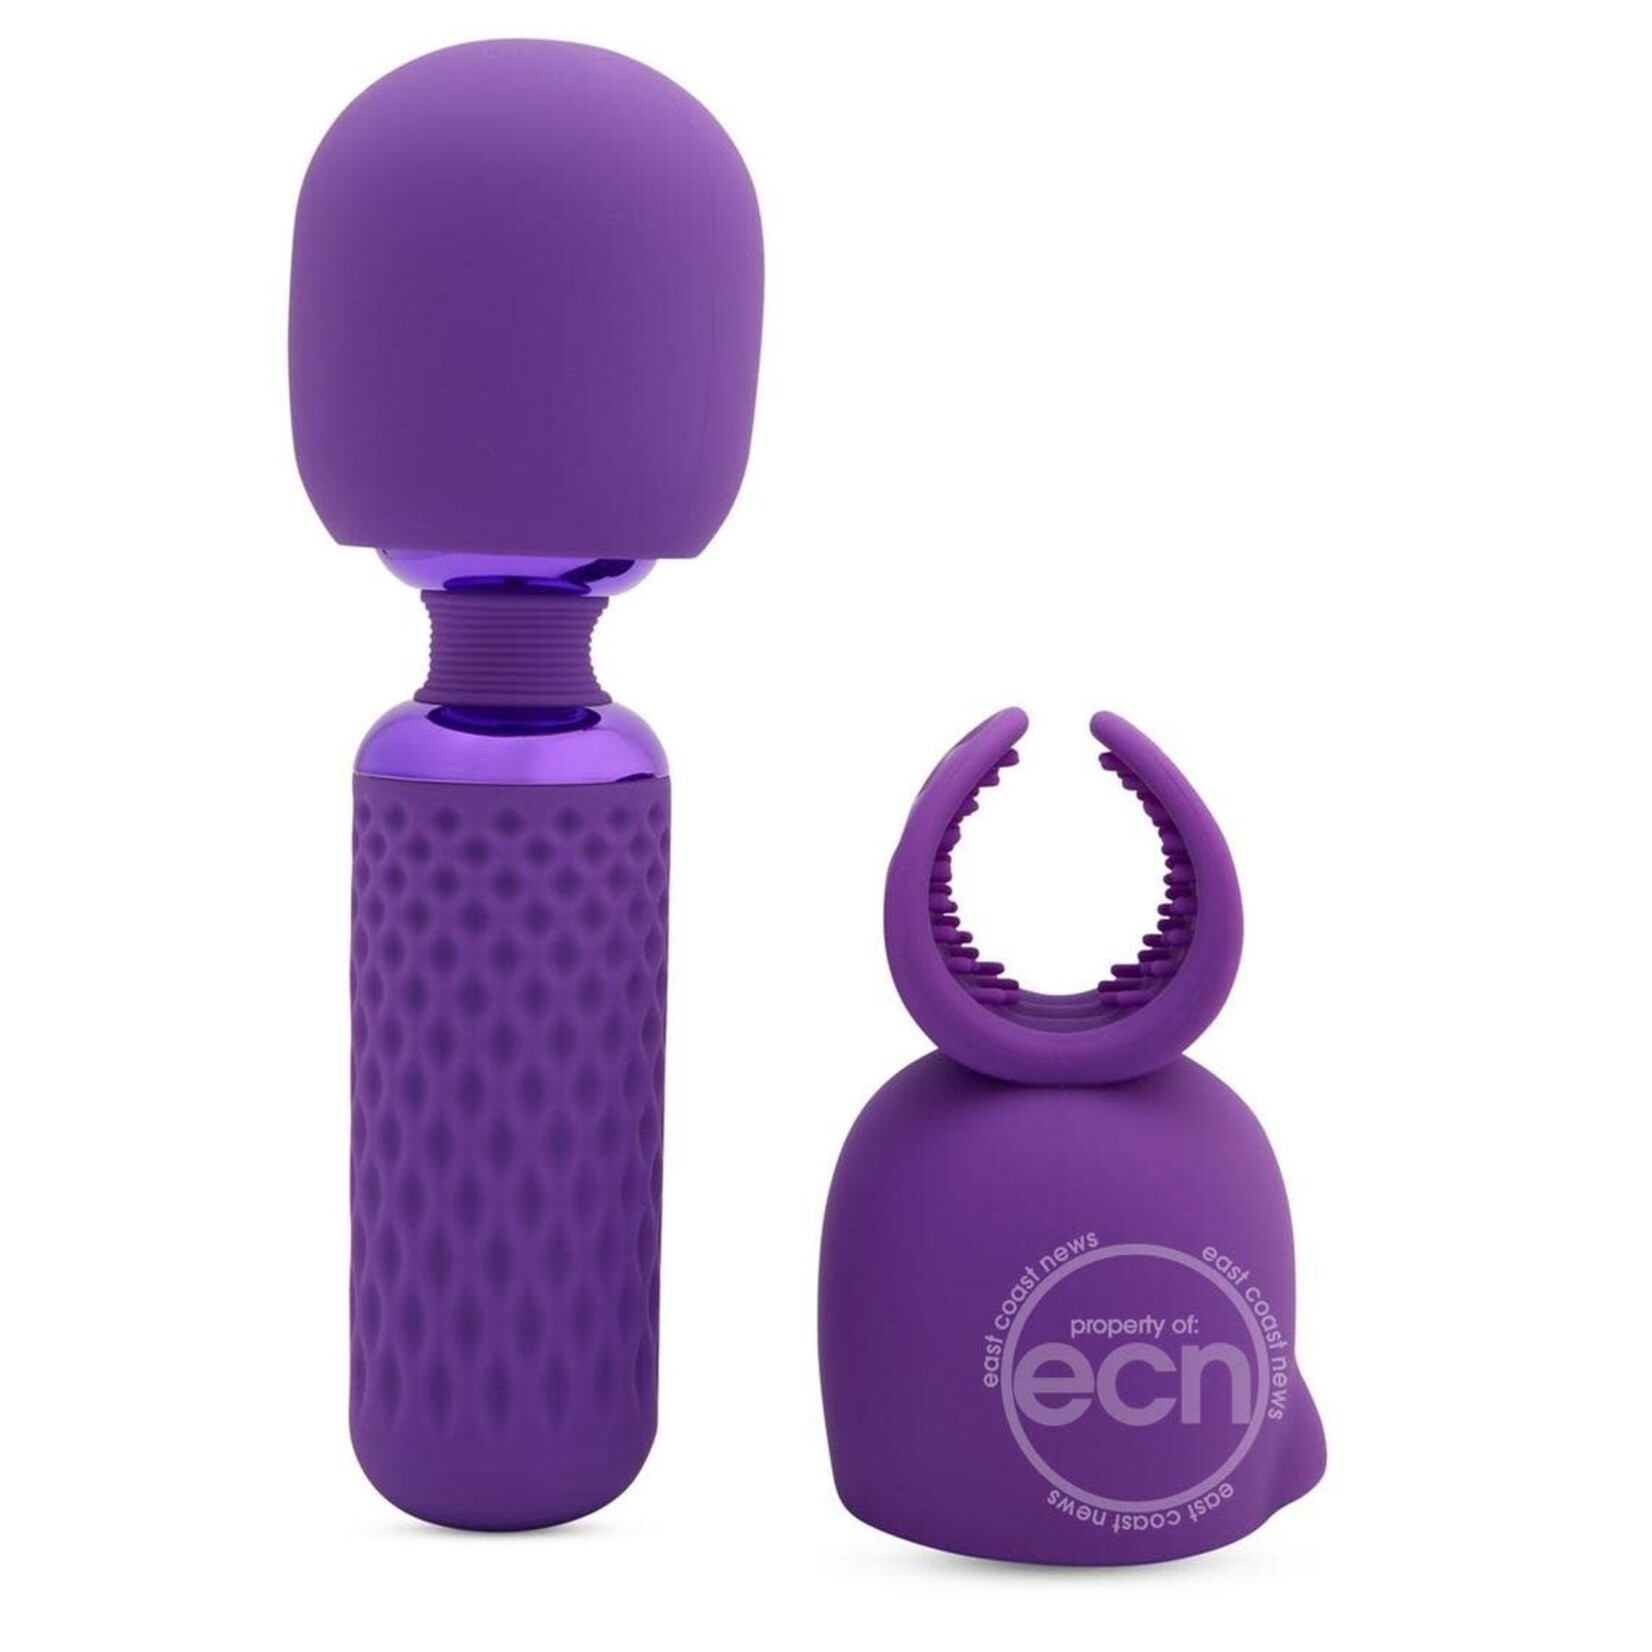 Nu Sensuelle Harlow Nubii Rechargeable Silicone Mini Heating Wand with Attachment - Purple